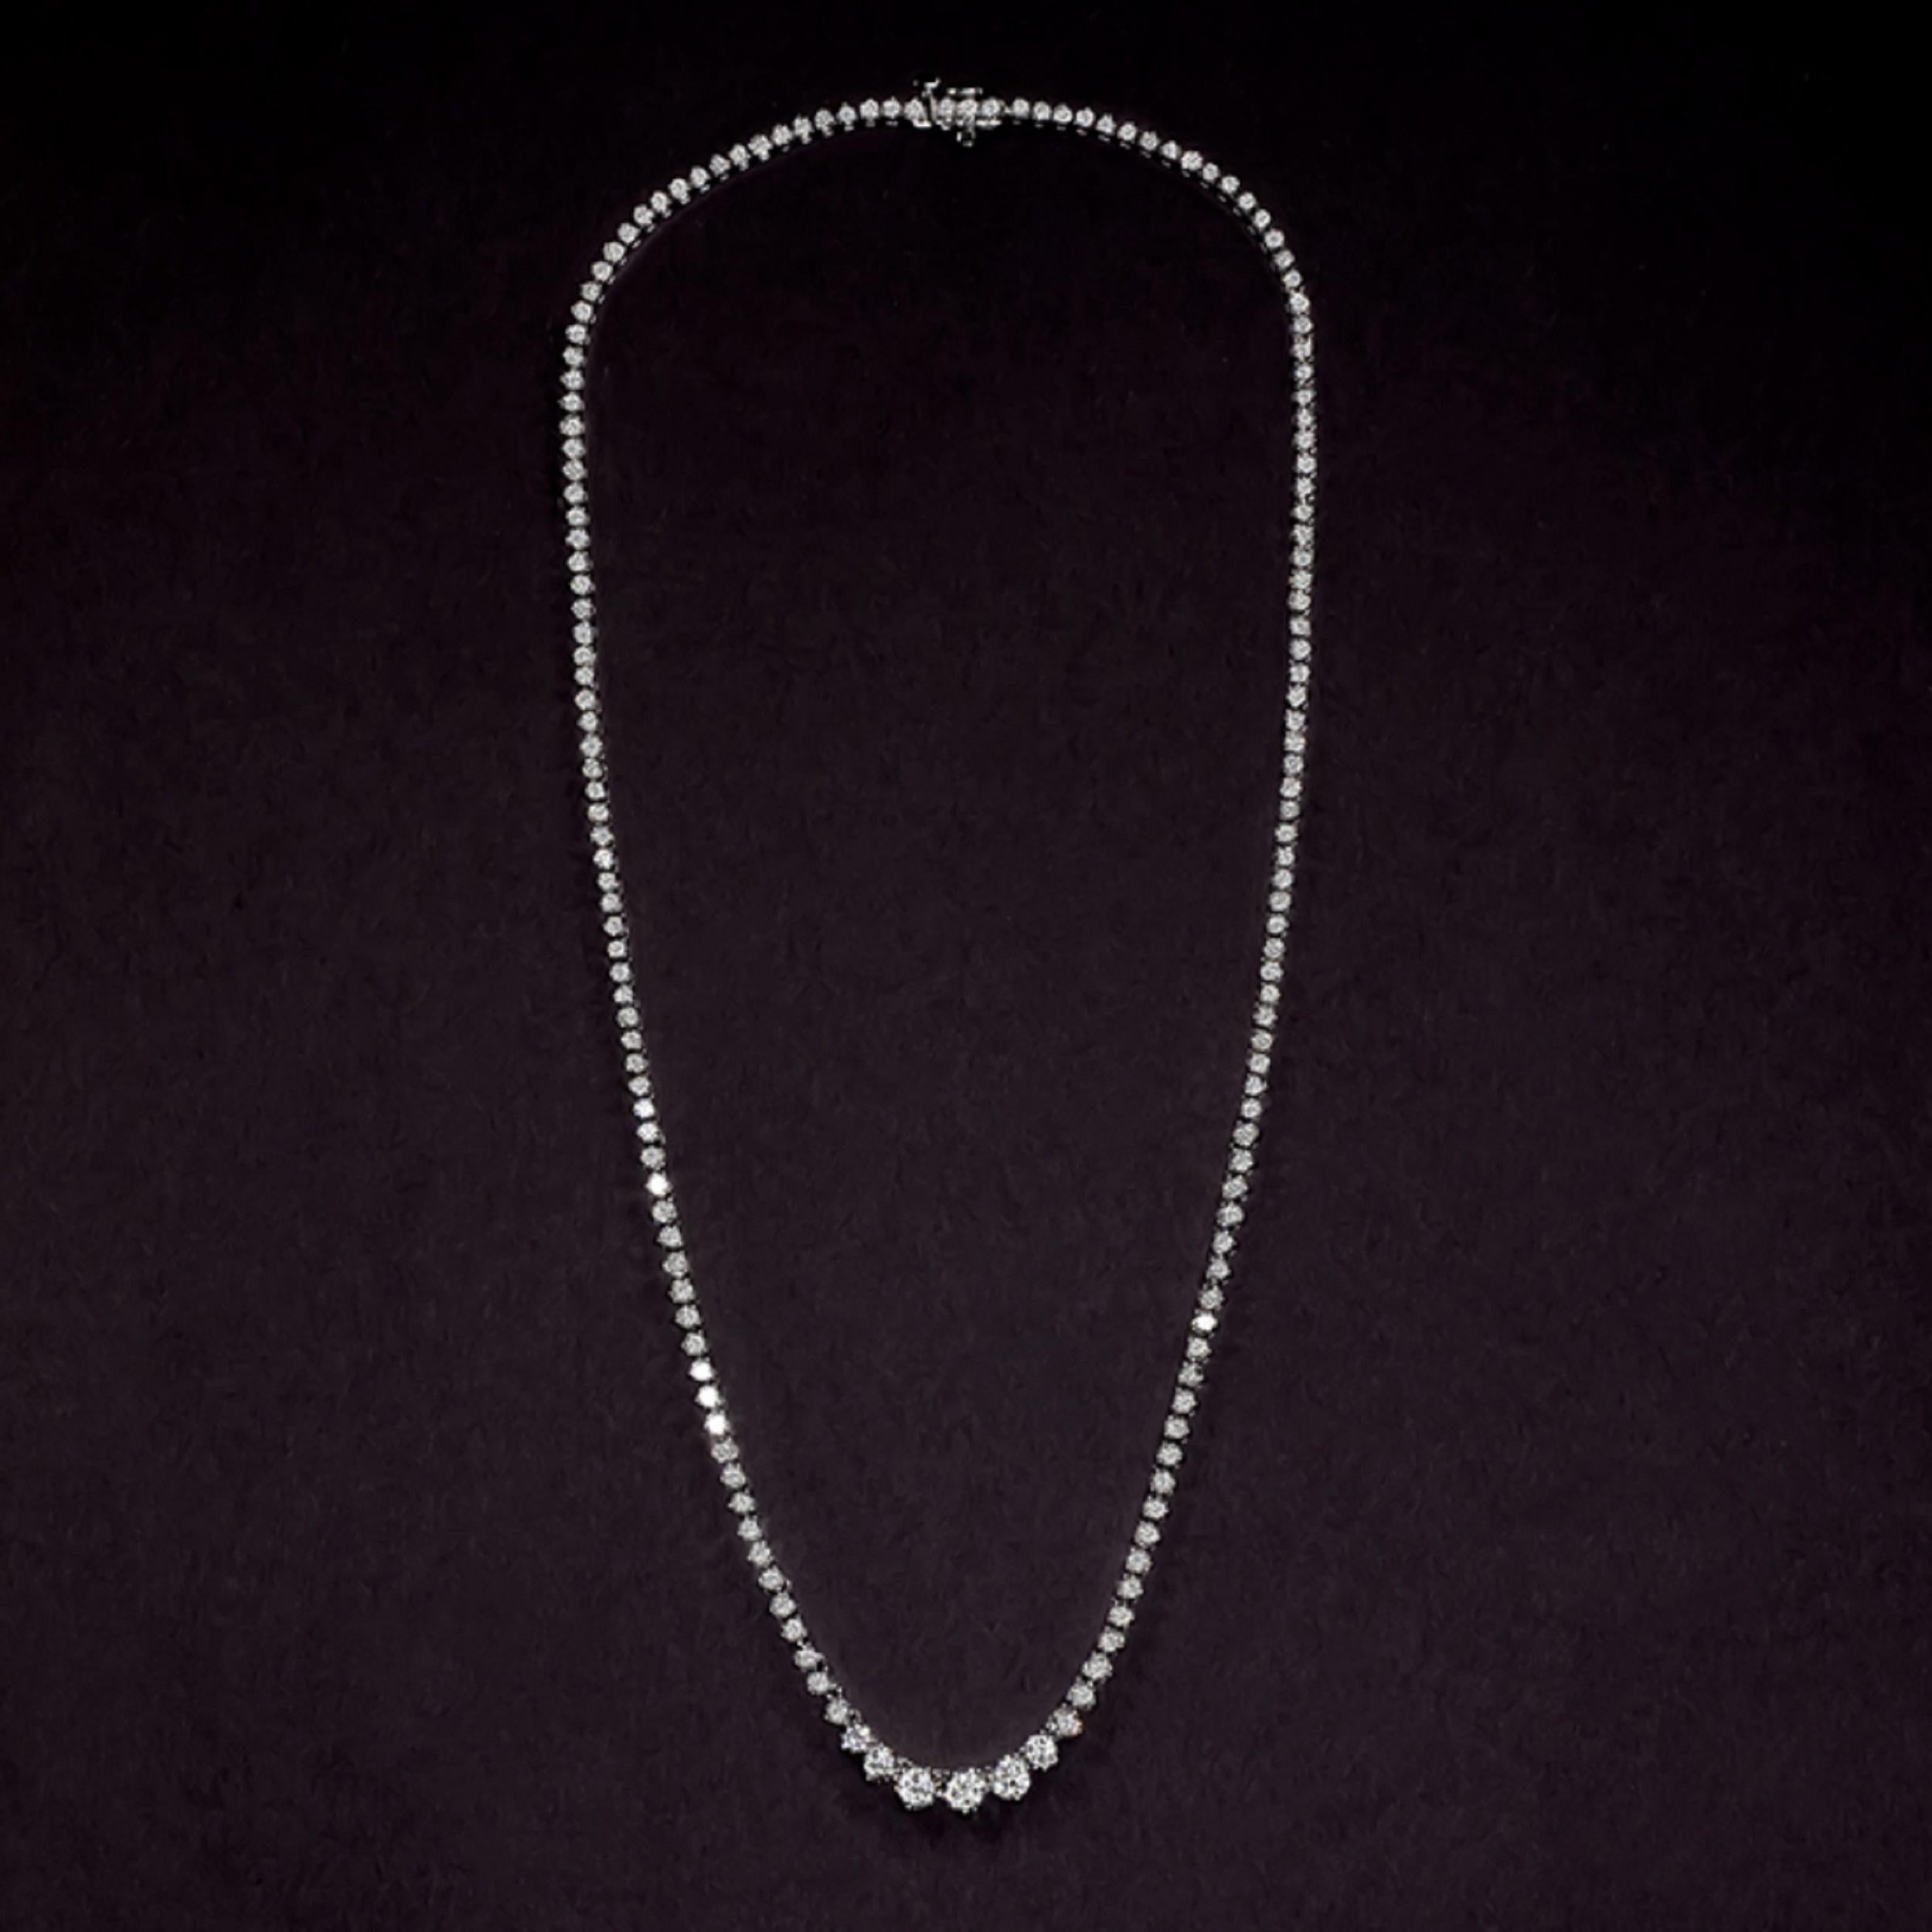 Timelessly elegant riviera necklace dazzles with 7.40 carats of bright white, eye clean, and excellently cut diamonds. Exceptionally well cut, these diamonds are very bright and lively! The diamonds are gracefully graduated, and overall, the